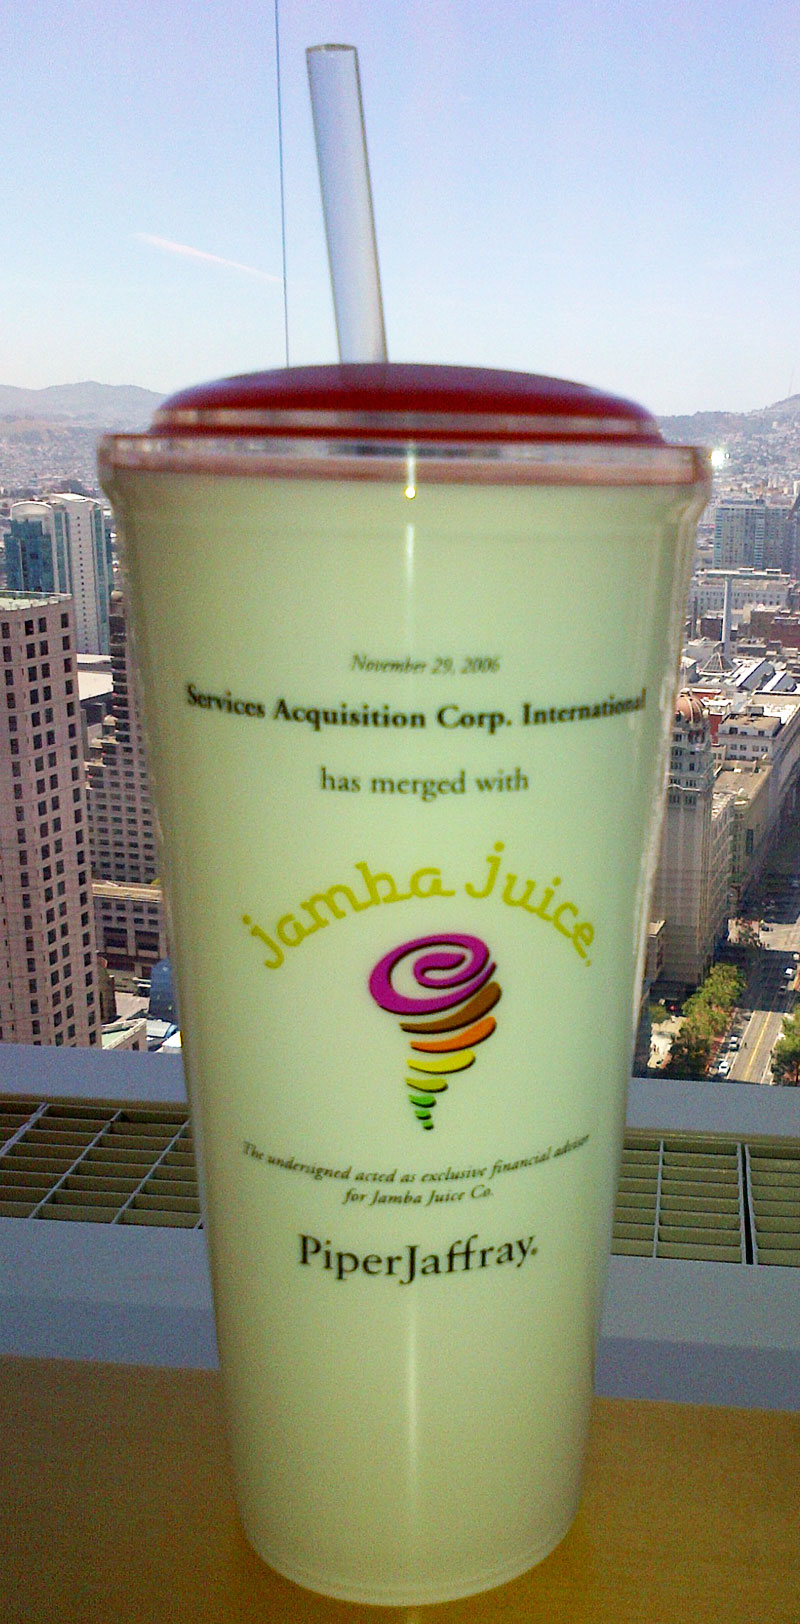 Jamba Juice Merger with Services Acquisition Corp (2006)